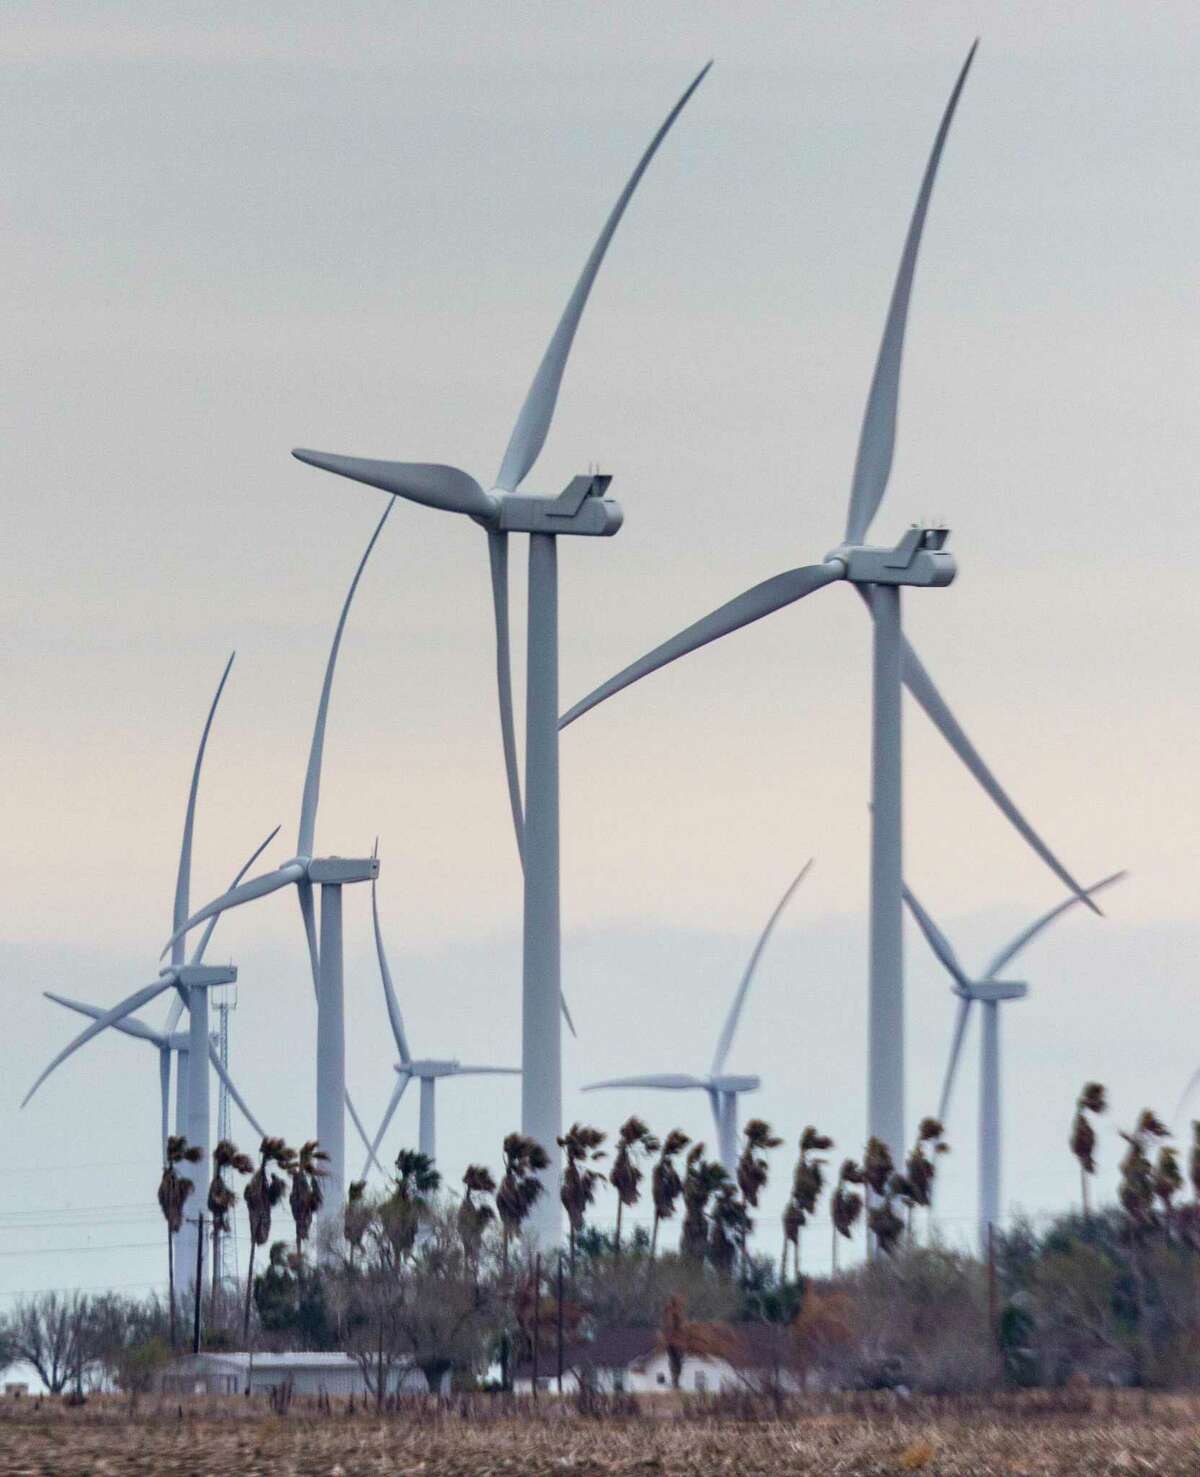 Wind energy accounts for 23 percent of Texas energy. To honor the Earth and combat climate change, Texas policymakers should be embracing clean energy sources and investing in future ones.